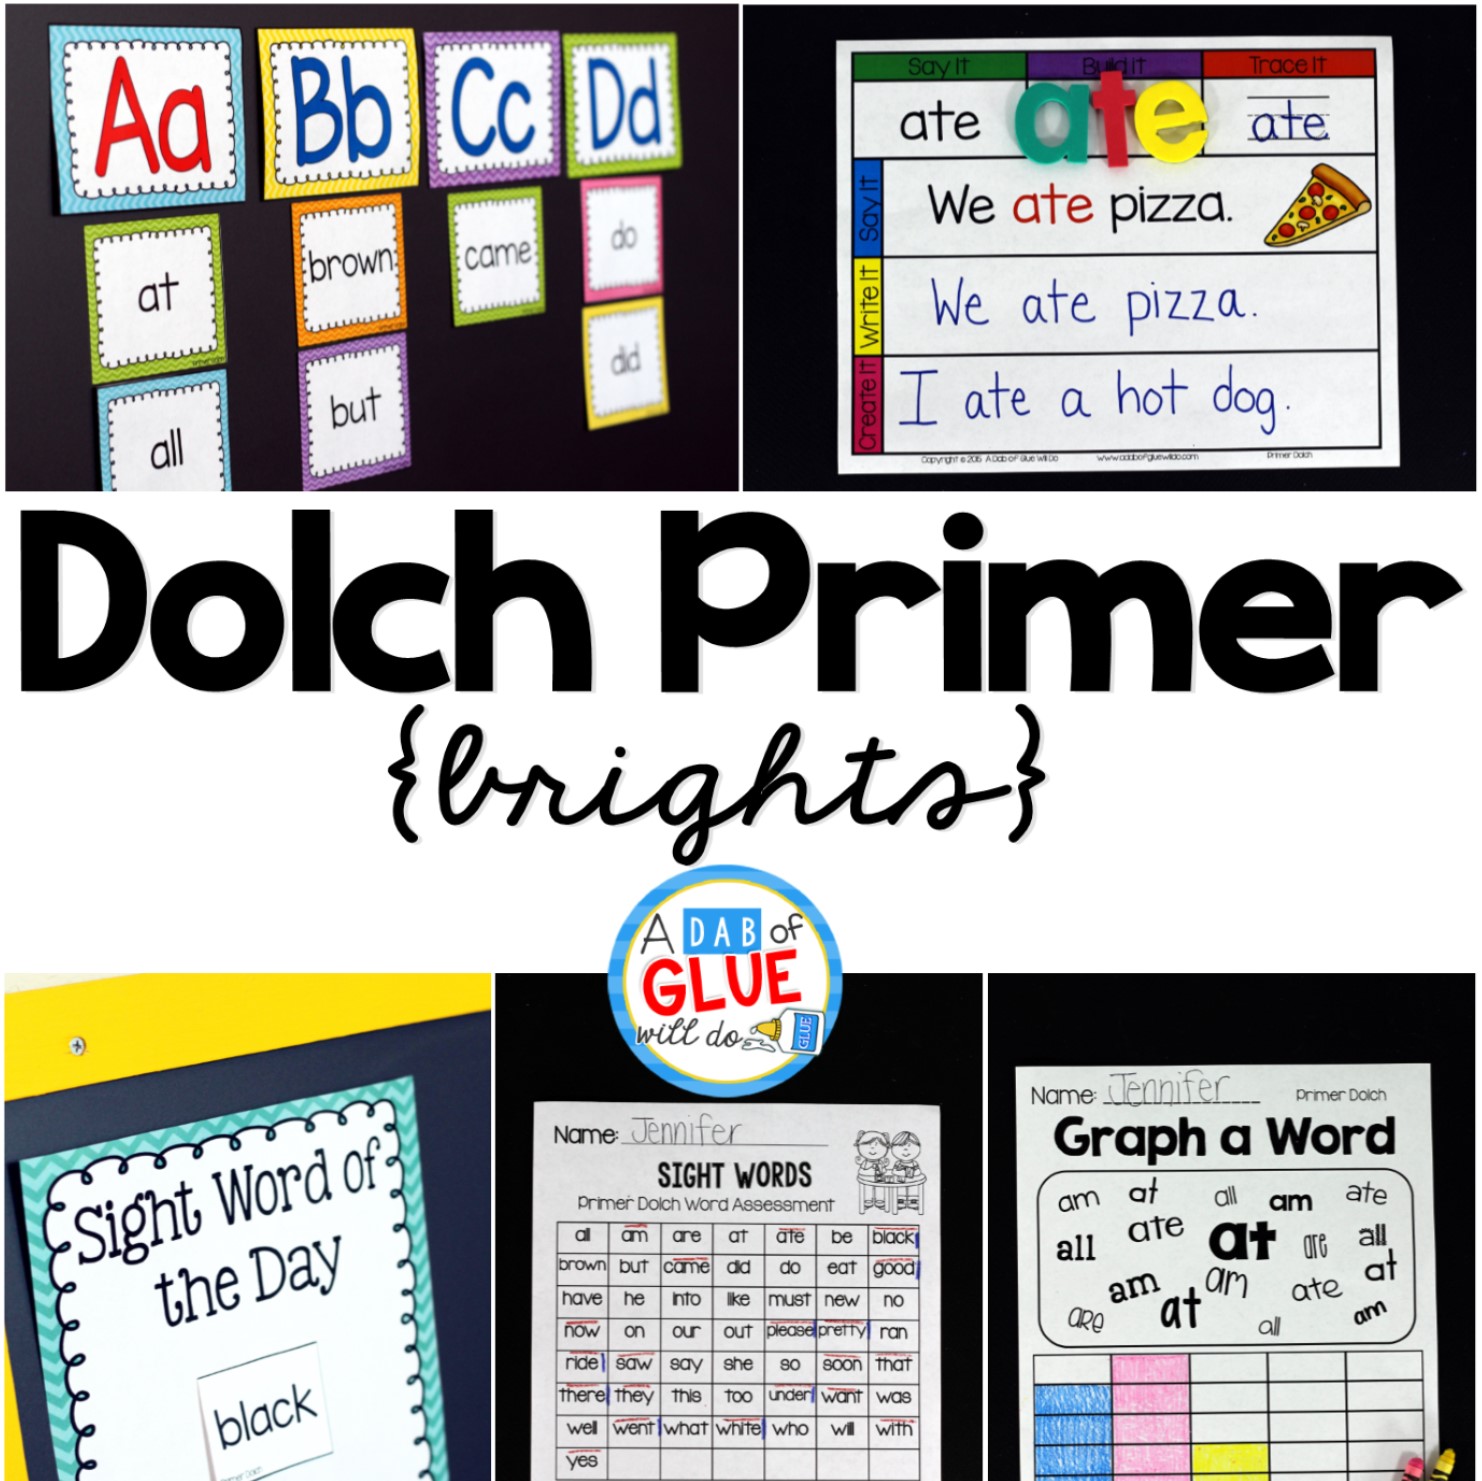 Engage your class in Dolch Primer {Brights} sight word activities, literacy centers, and word wall! This unit is perfect for literacy centers in Kindergarten, First Grade, and Second Grade classrooms and packed full of inviting student activities.  Students will learn using their favorite alphabet games, Play Doh word mats, Tic-Tac-Toe, and more! This pack is great for homeschoolers with a student assessment included!